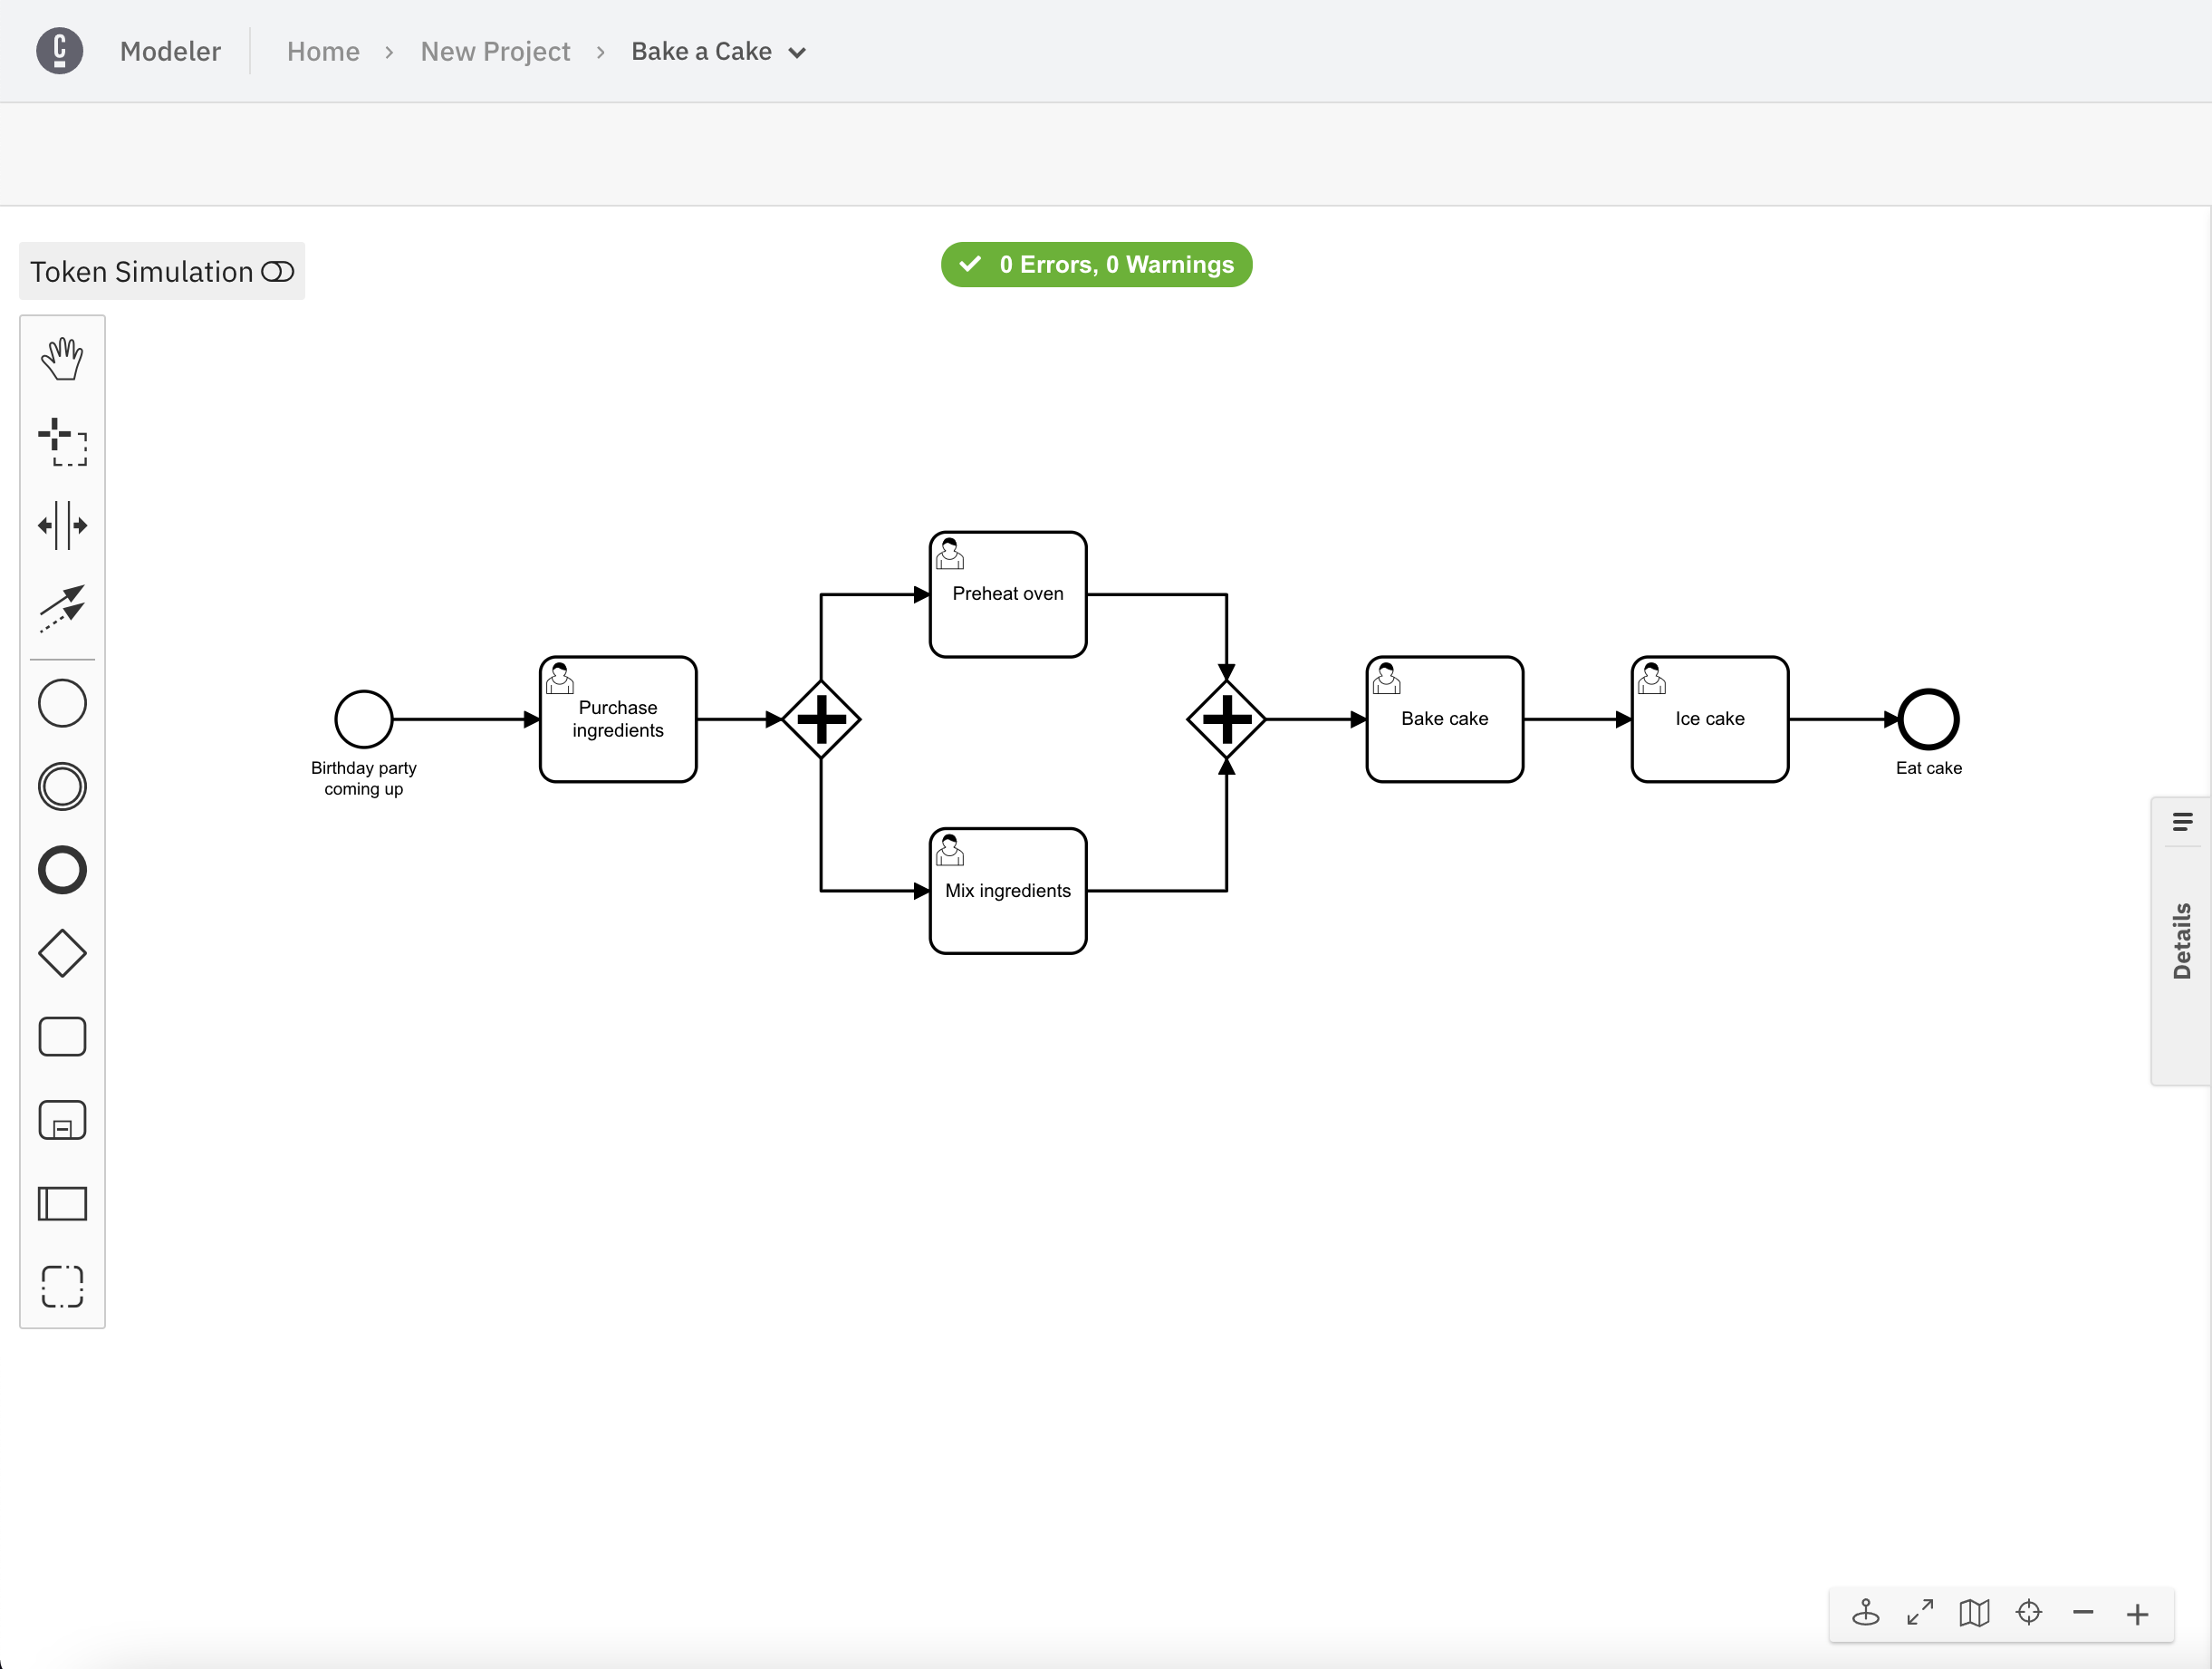 completed bpmn diagram